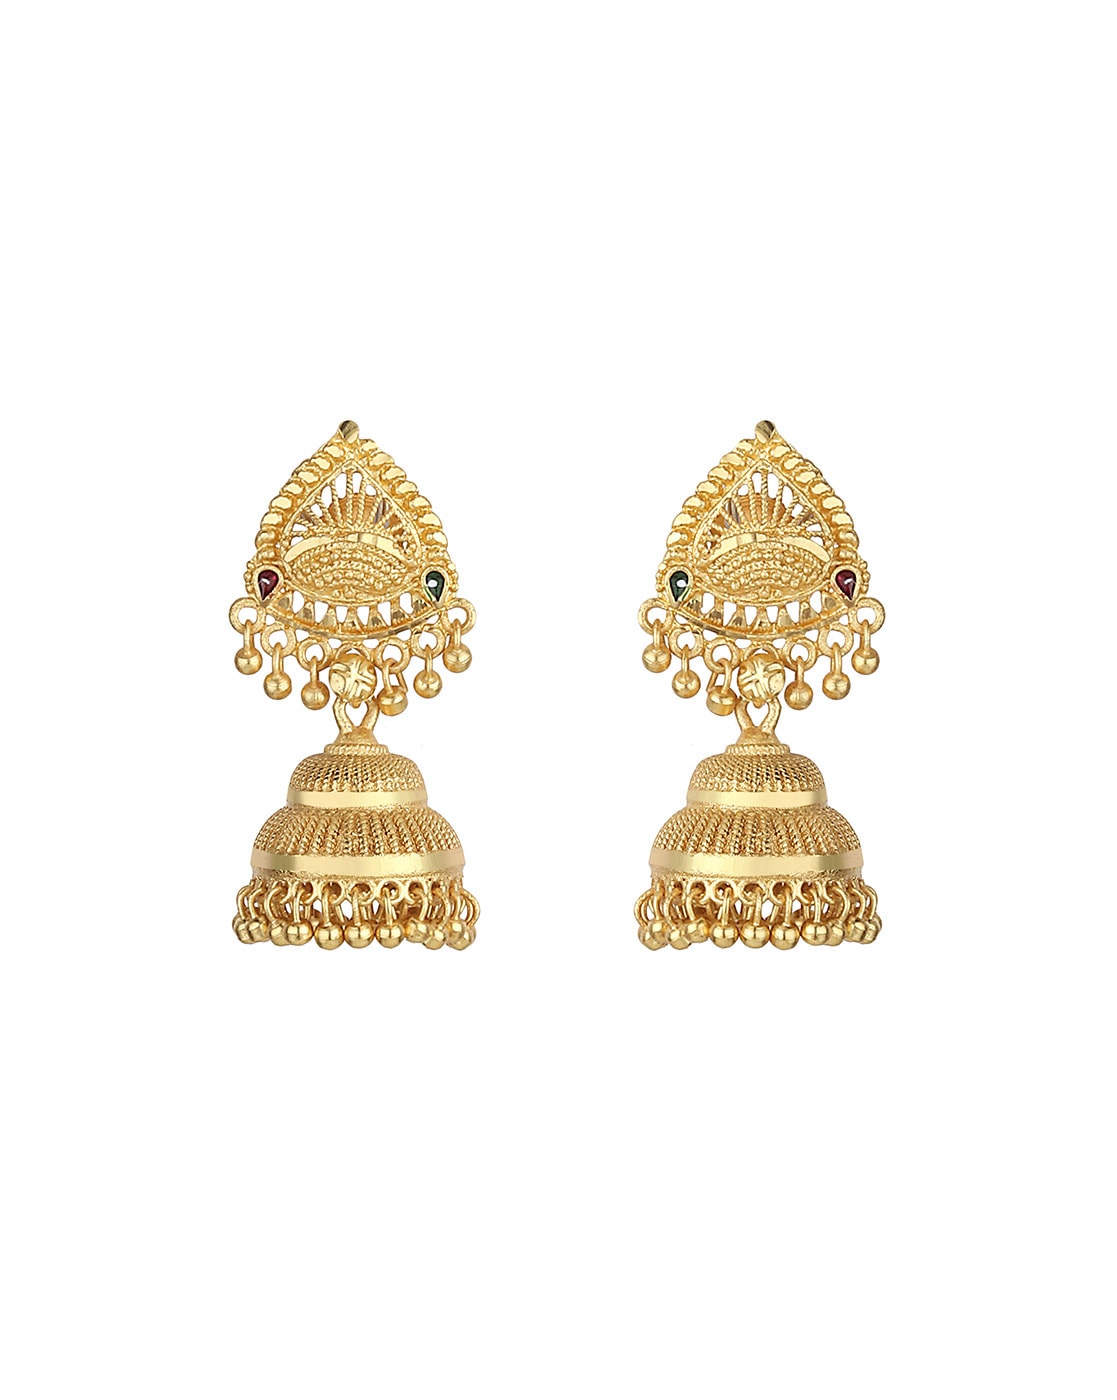 Exquisite South Indian Jhumka with Delicate Diamond Glow